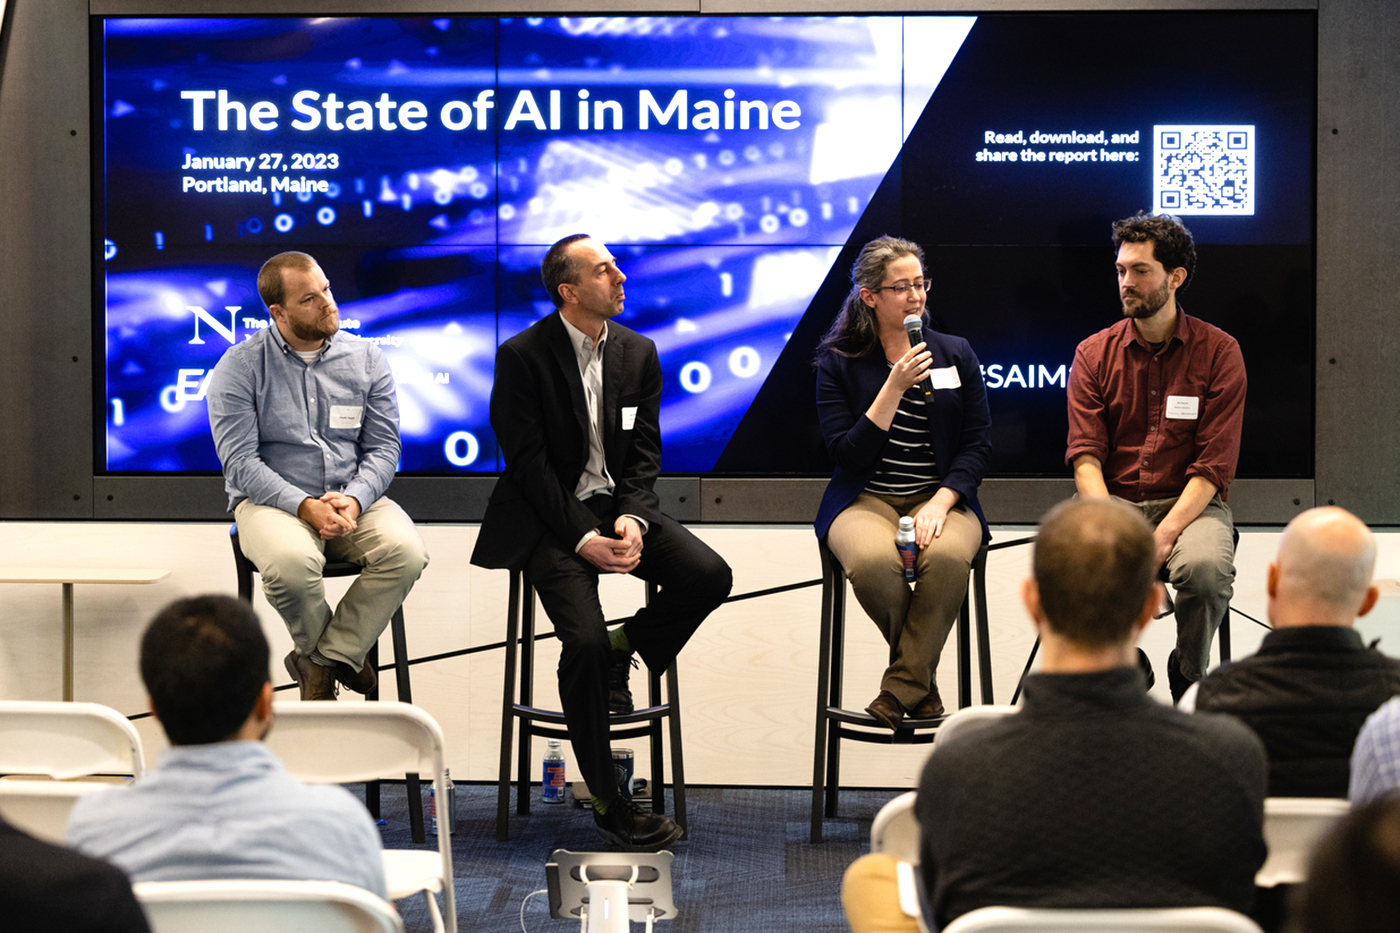 Panel of speakers at 'The State of AI in Maine' event